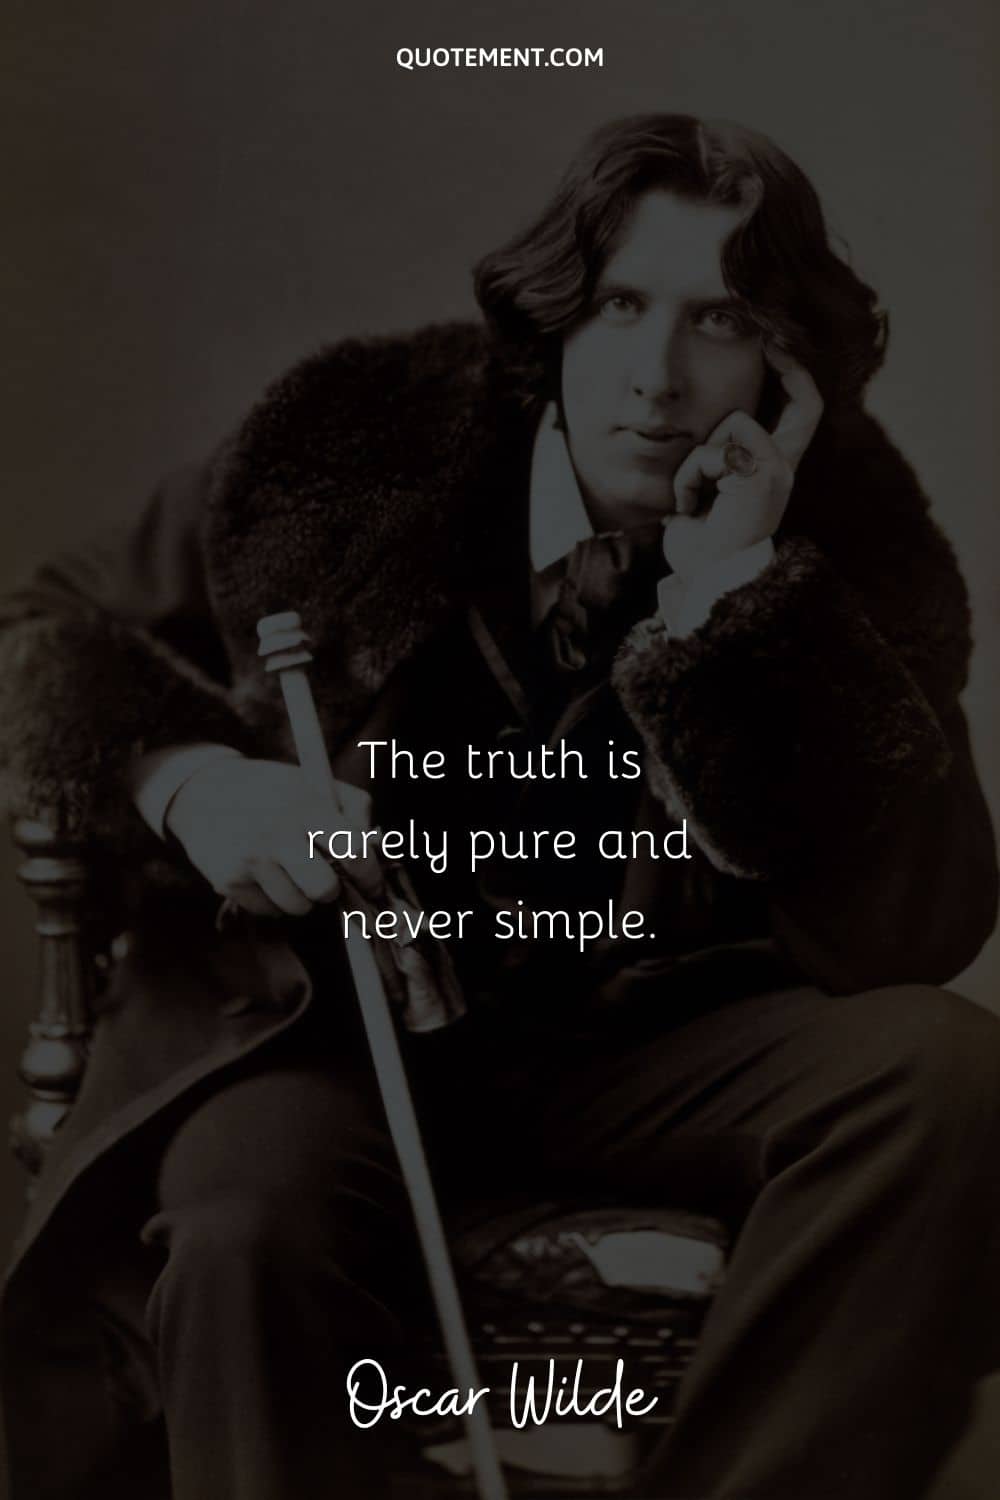 “The truth is rarely pure and never simple.” ― Oscar Wilde (The Importance of Being Earnest)